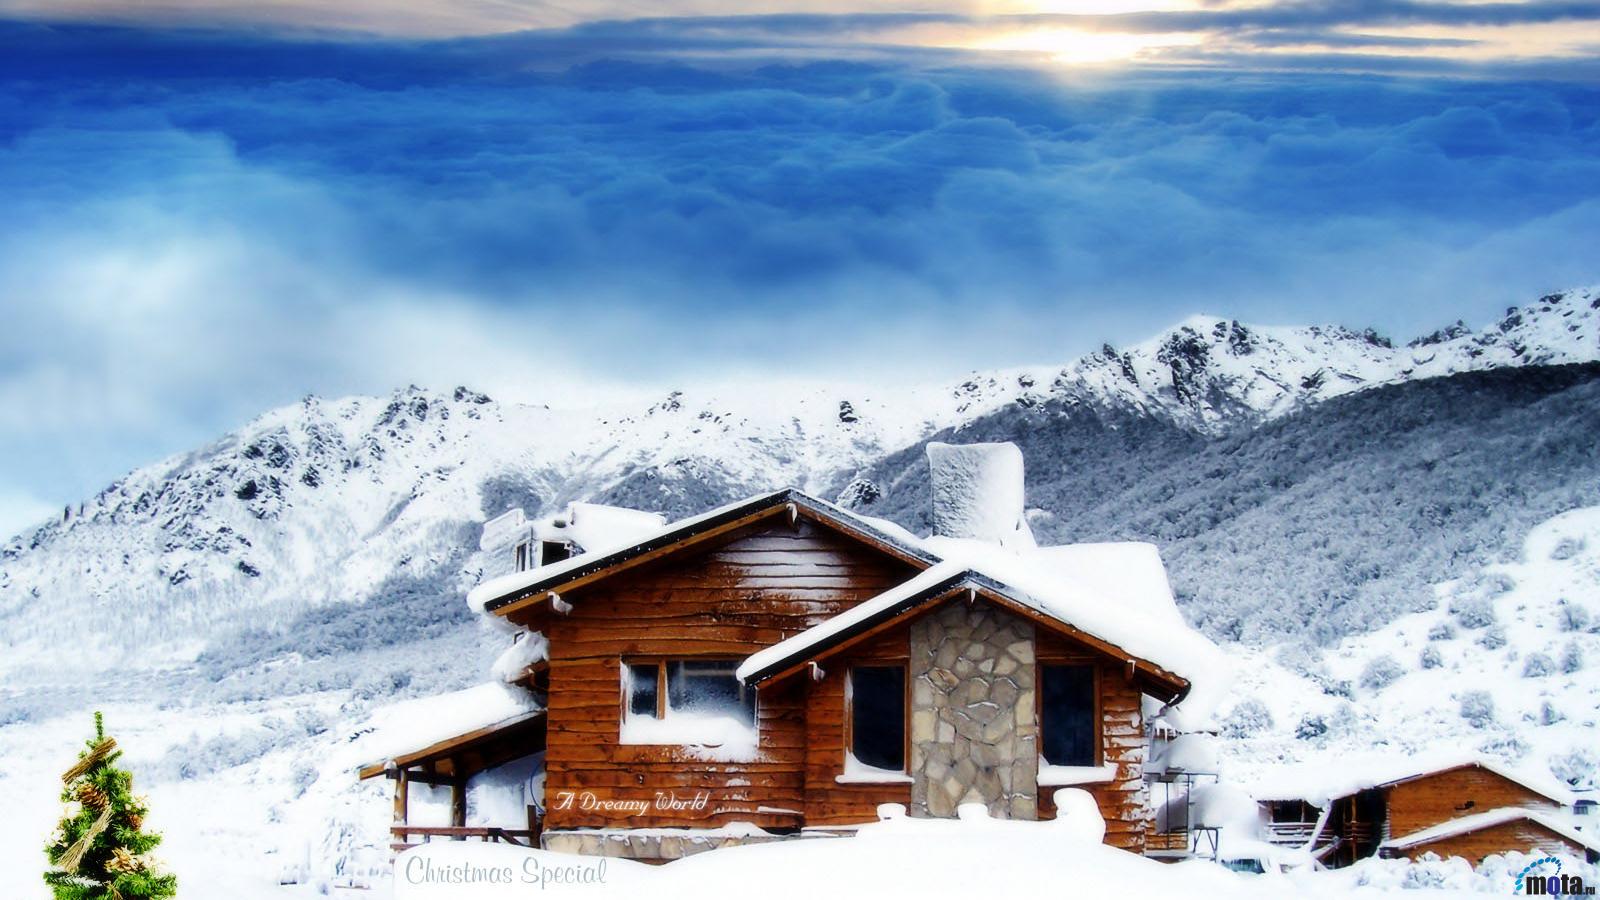 Wallpaper Snowy Cottage Christmas X Widescreen